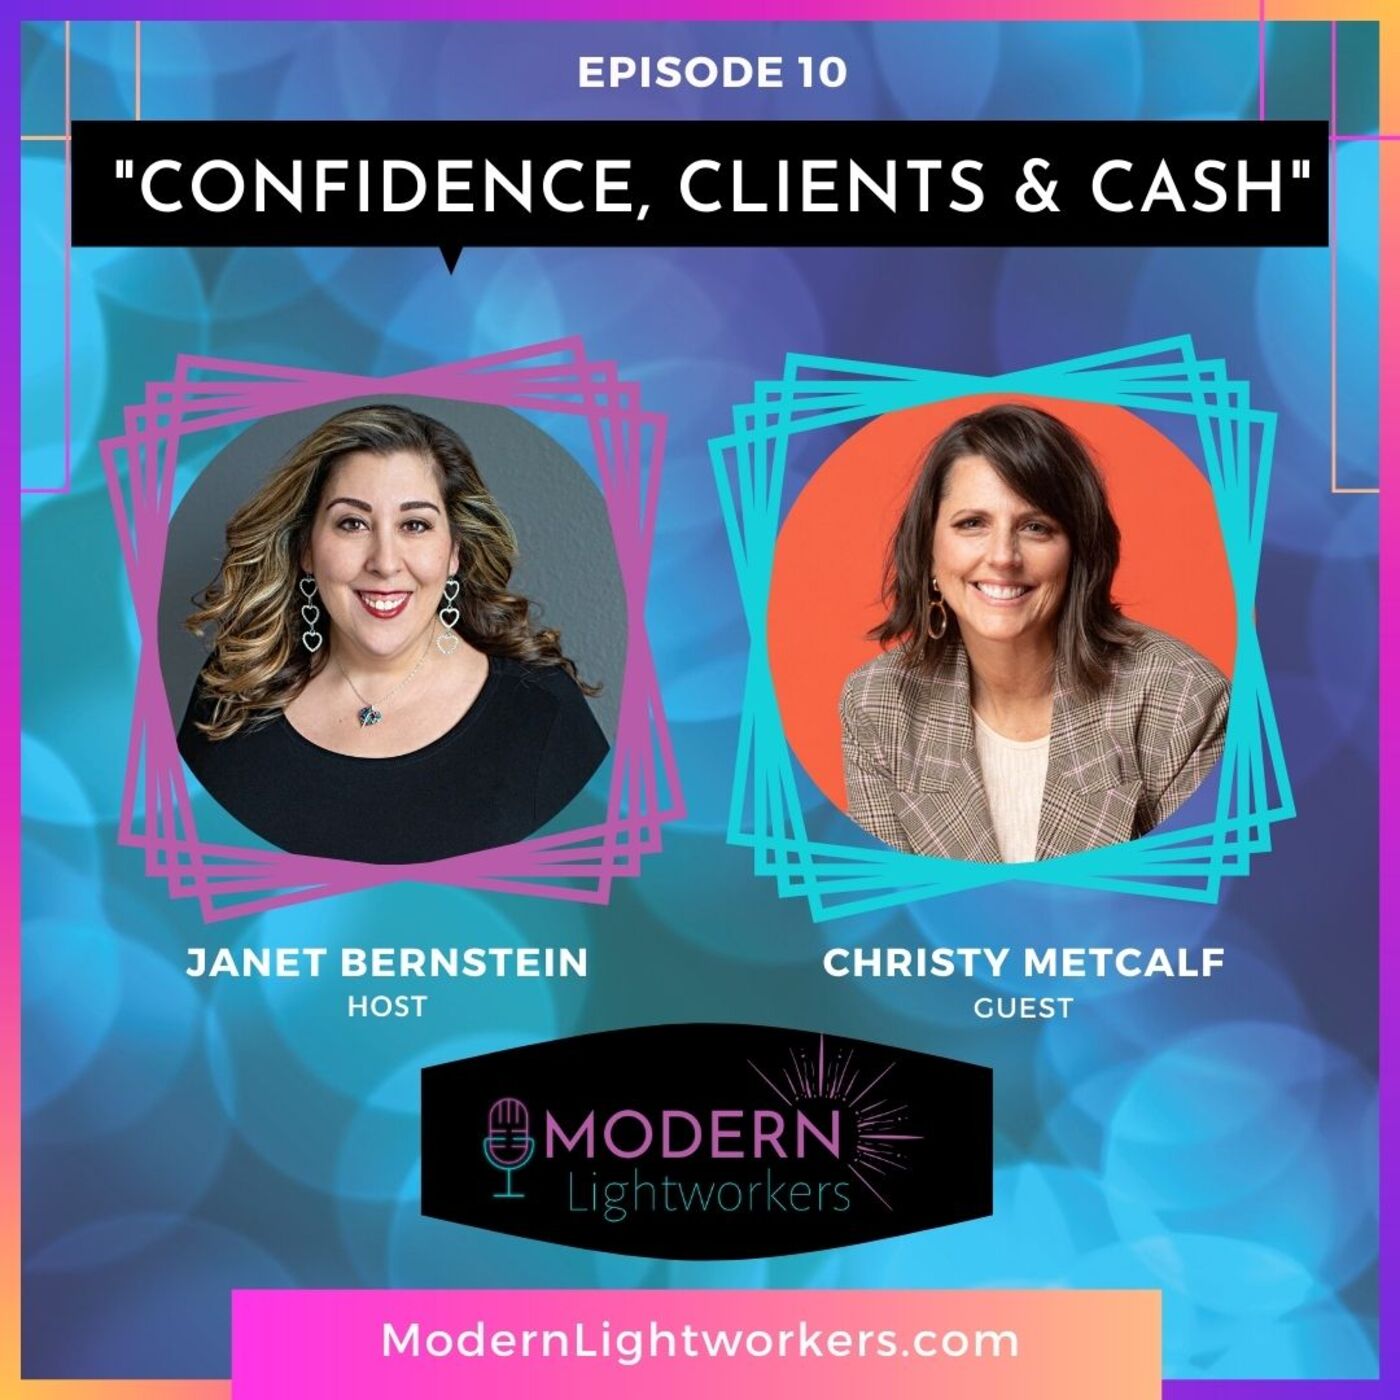 Modern Lightworkers Episode 10: Confidence, Clients & Cash!